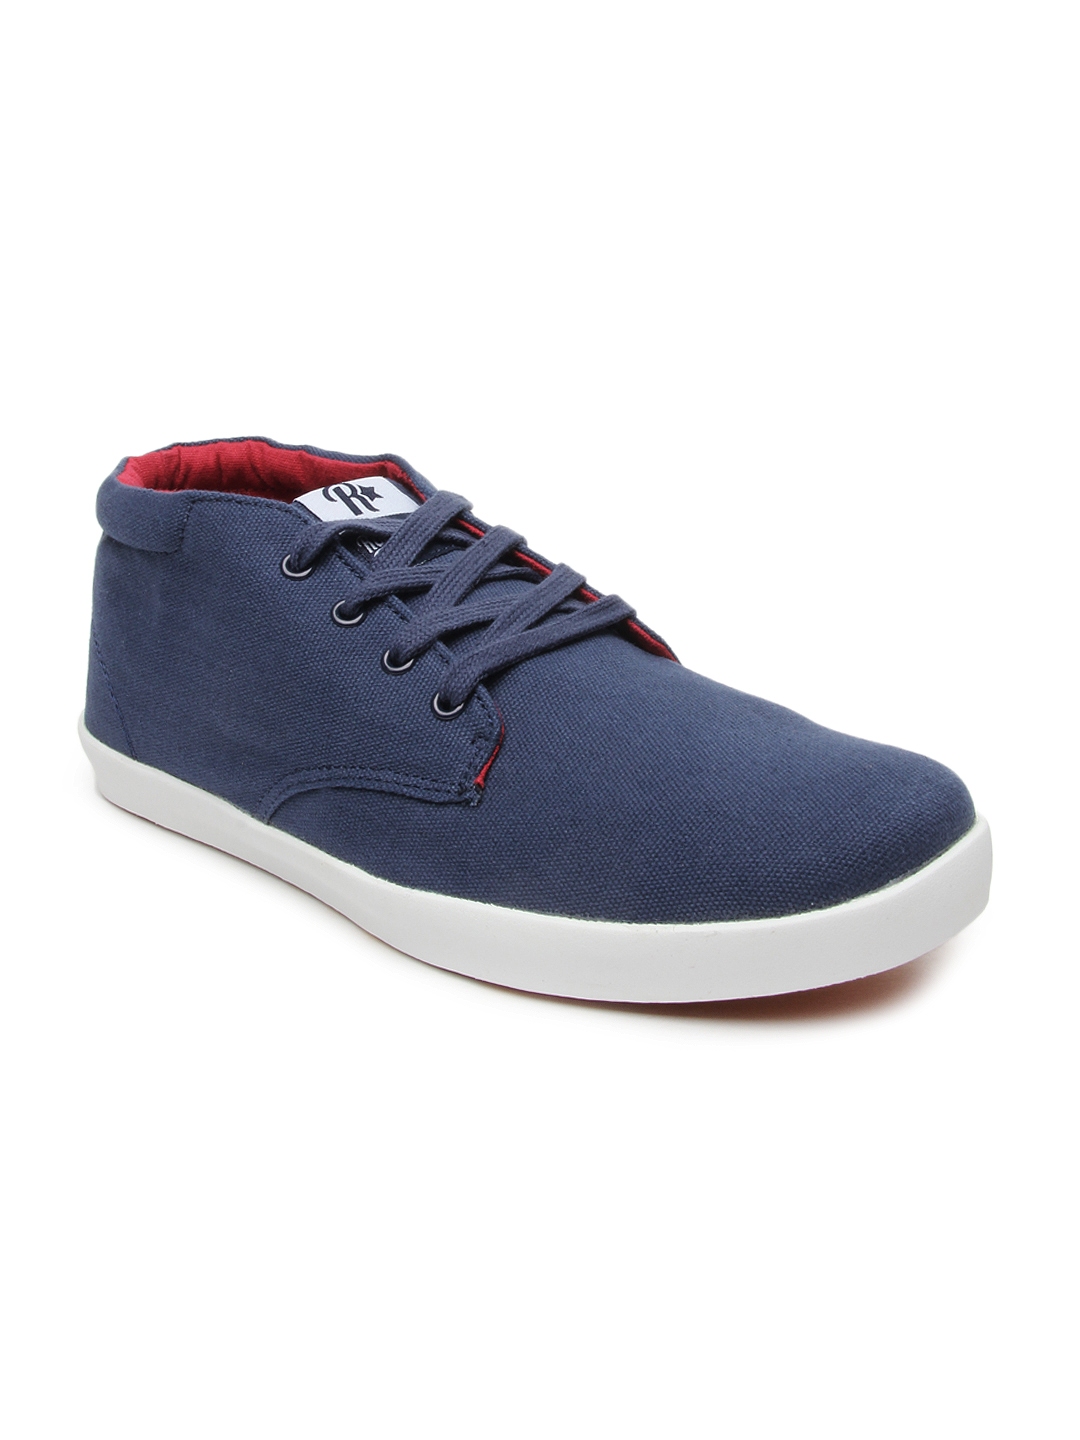 Buy Roadster Men Navy Casual Shoes - Casual Shoes for Men 419452 | Myntra